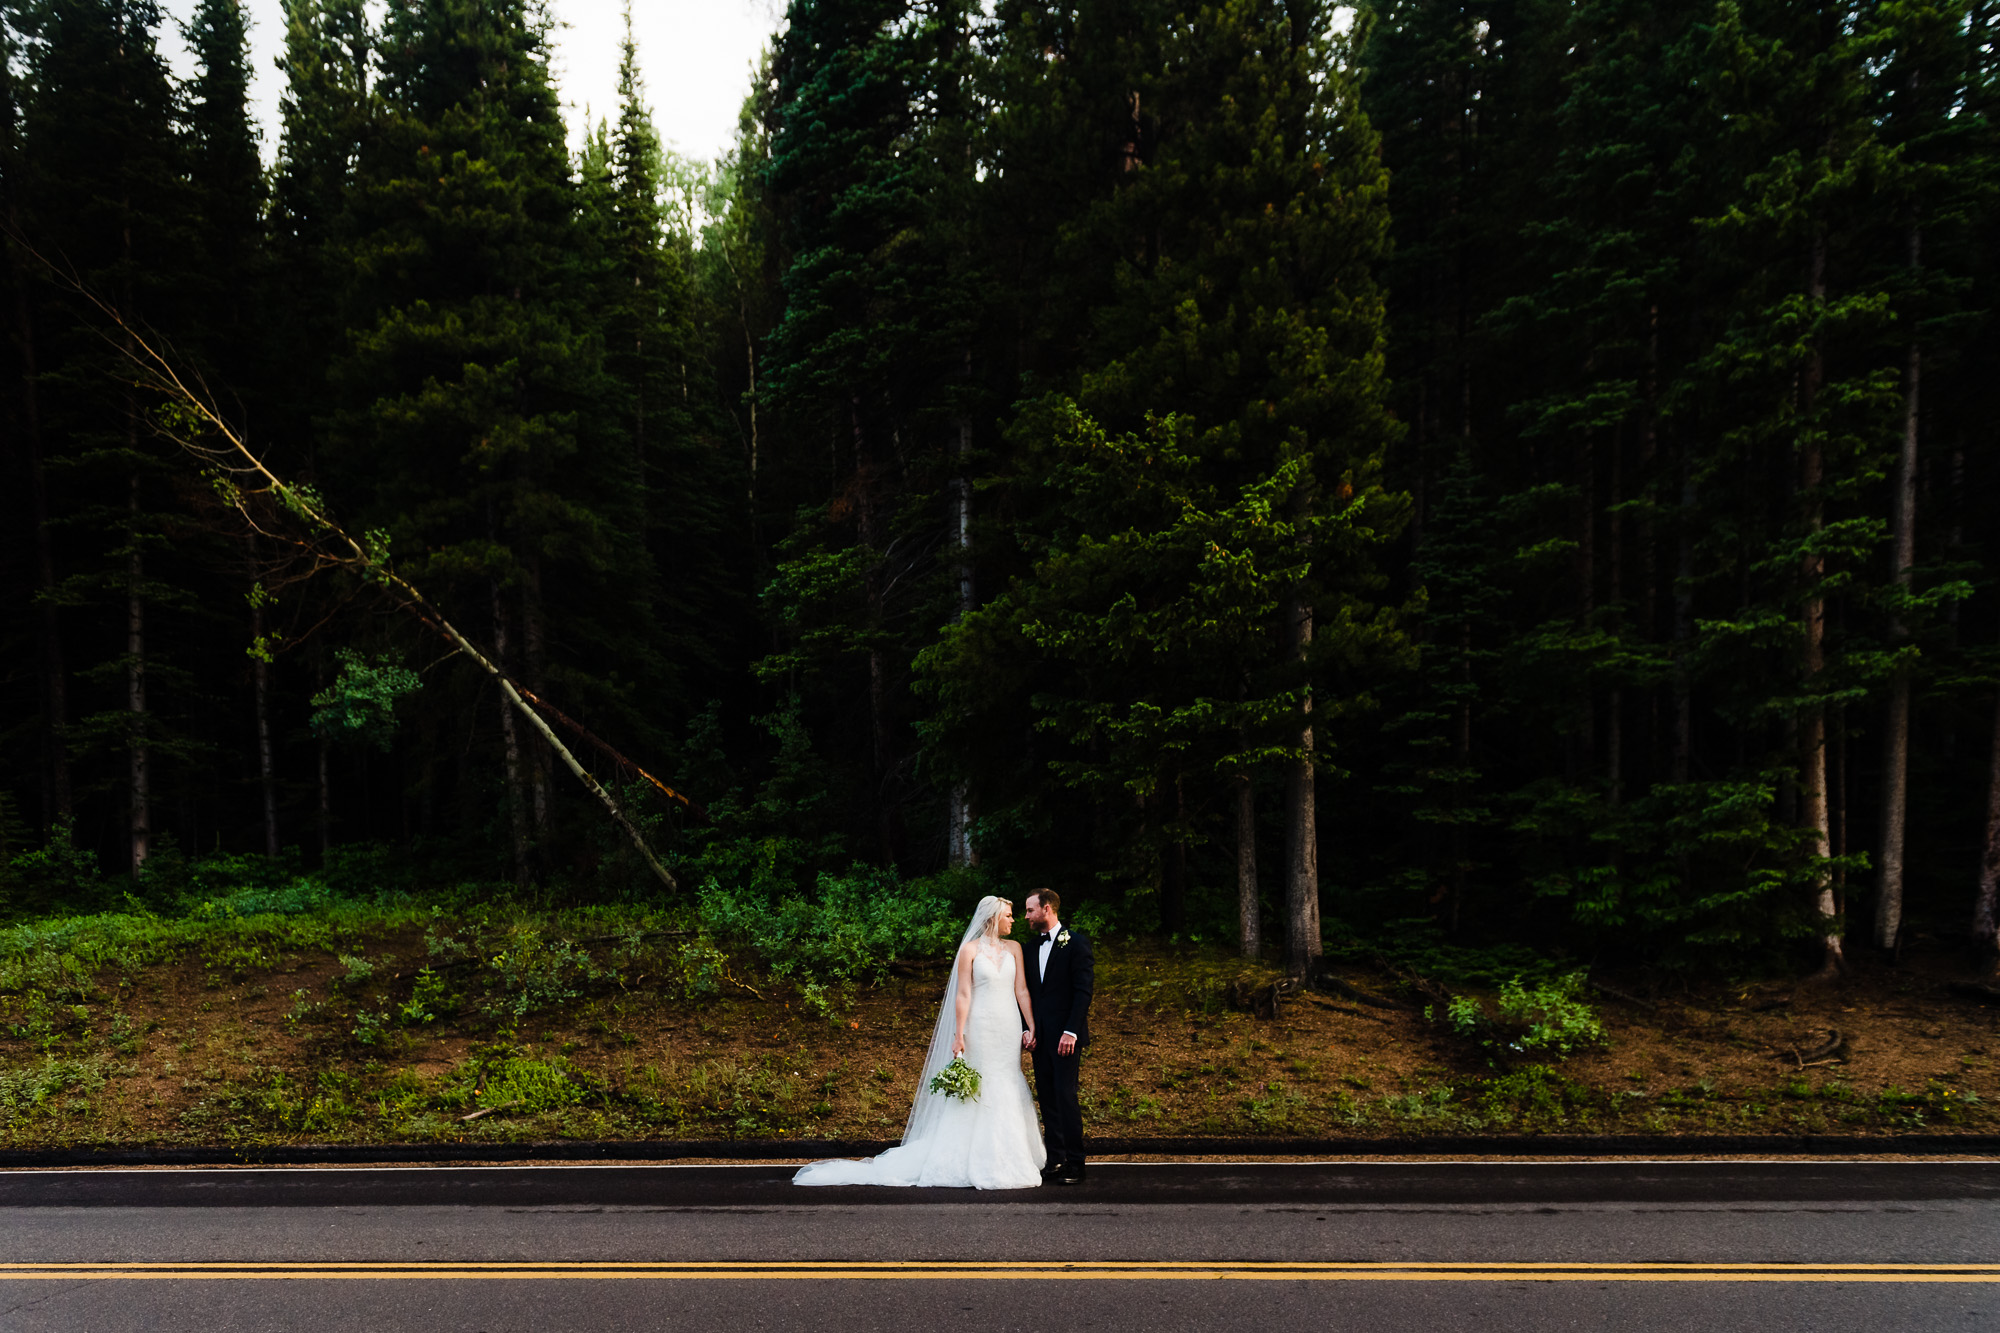 Couple in wedding attire in estes park in front of trees